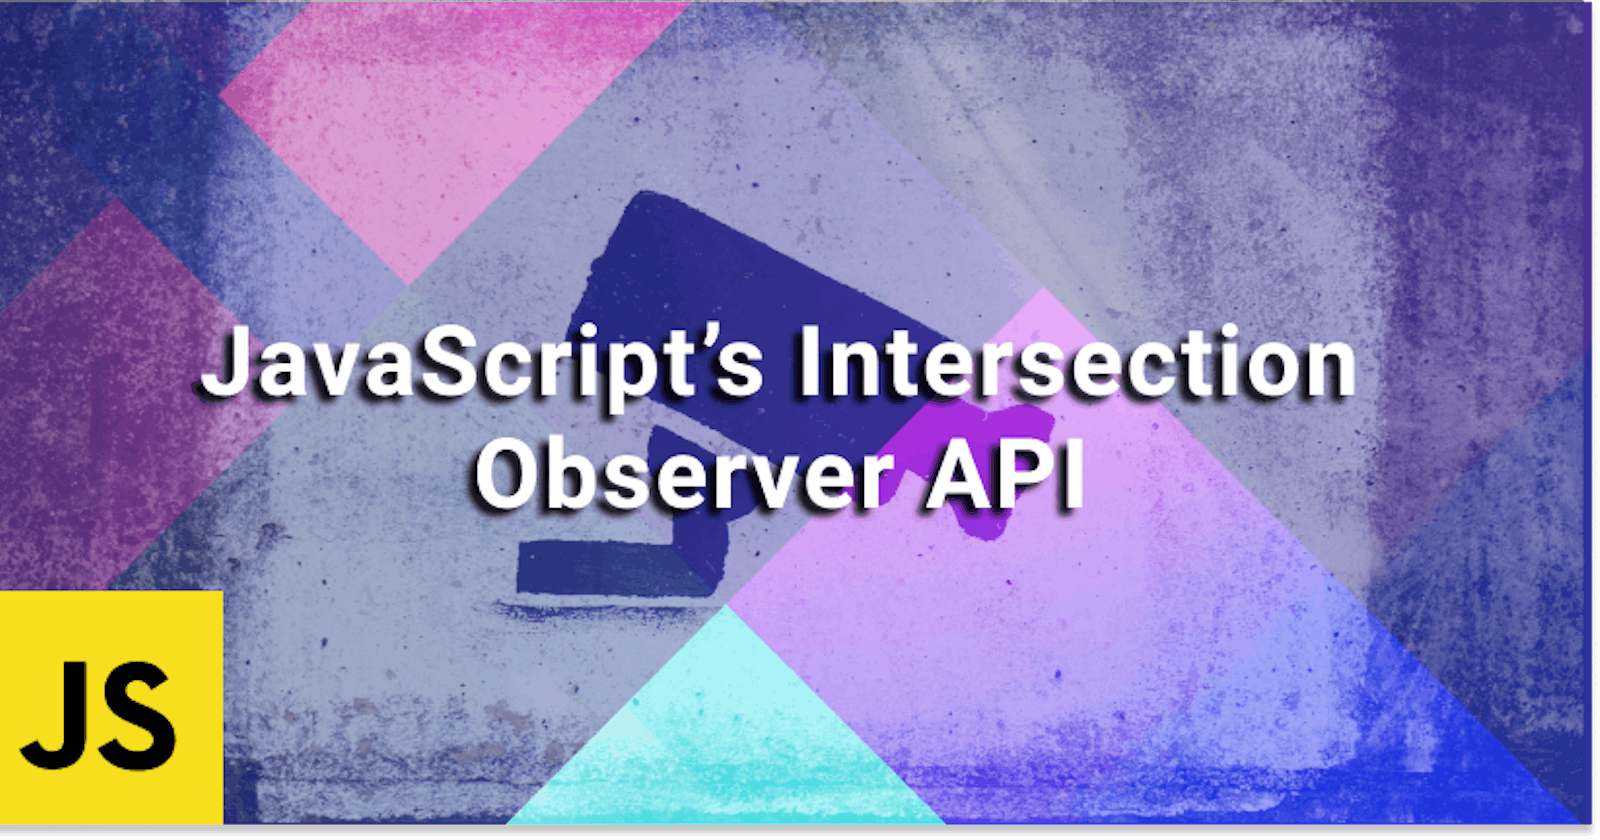 Revealing Contents on Scroll Using JavaScript’s Intersection Observer API